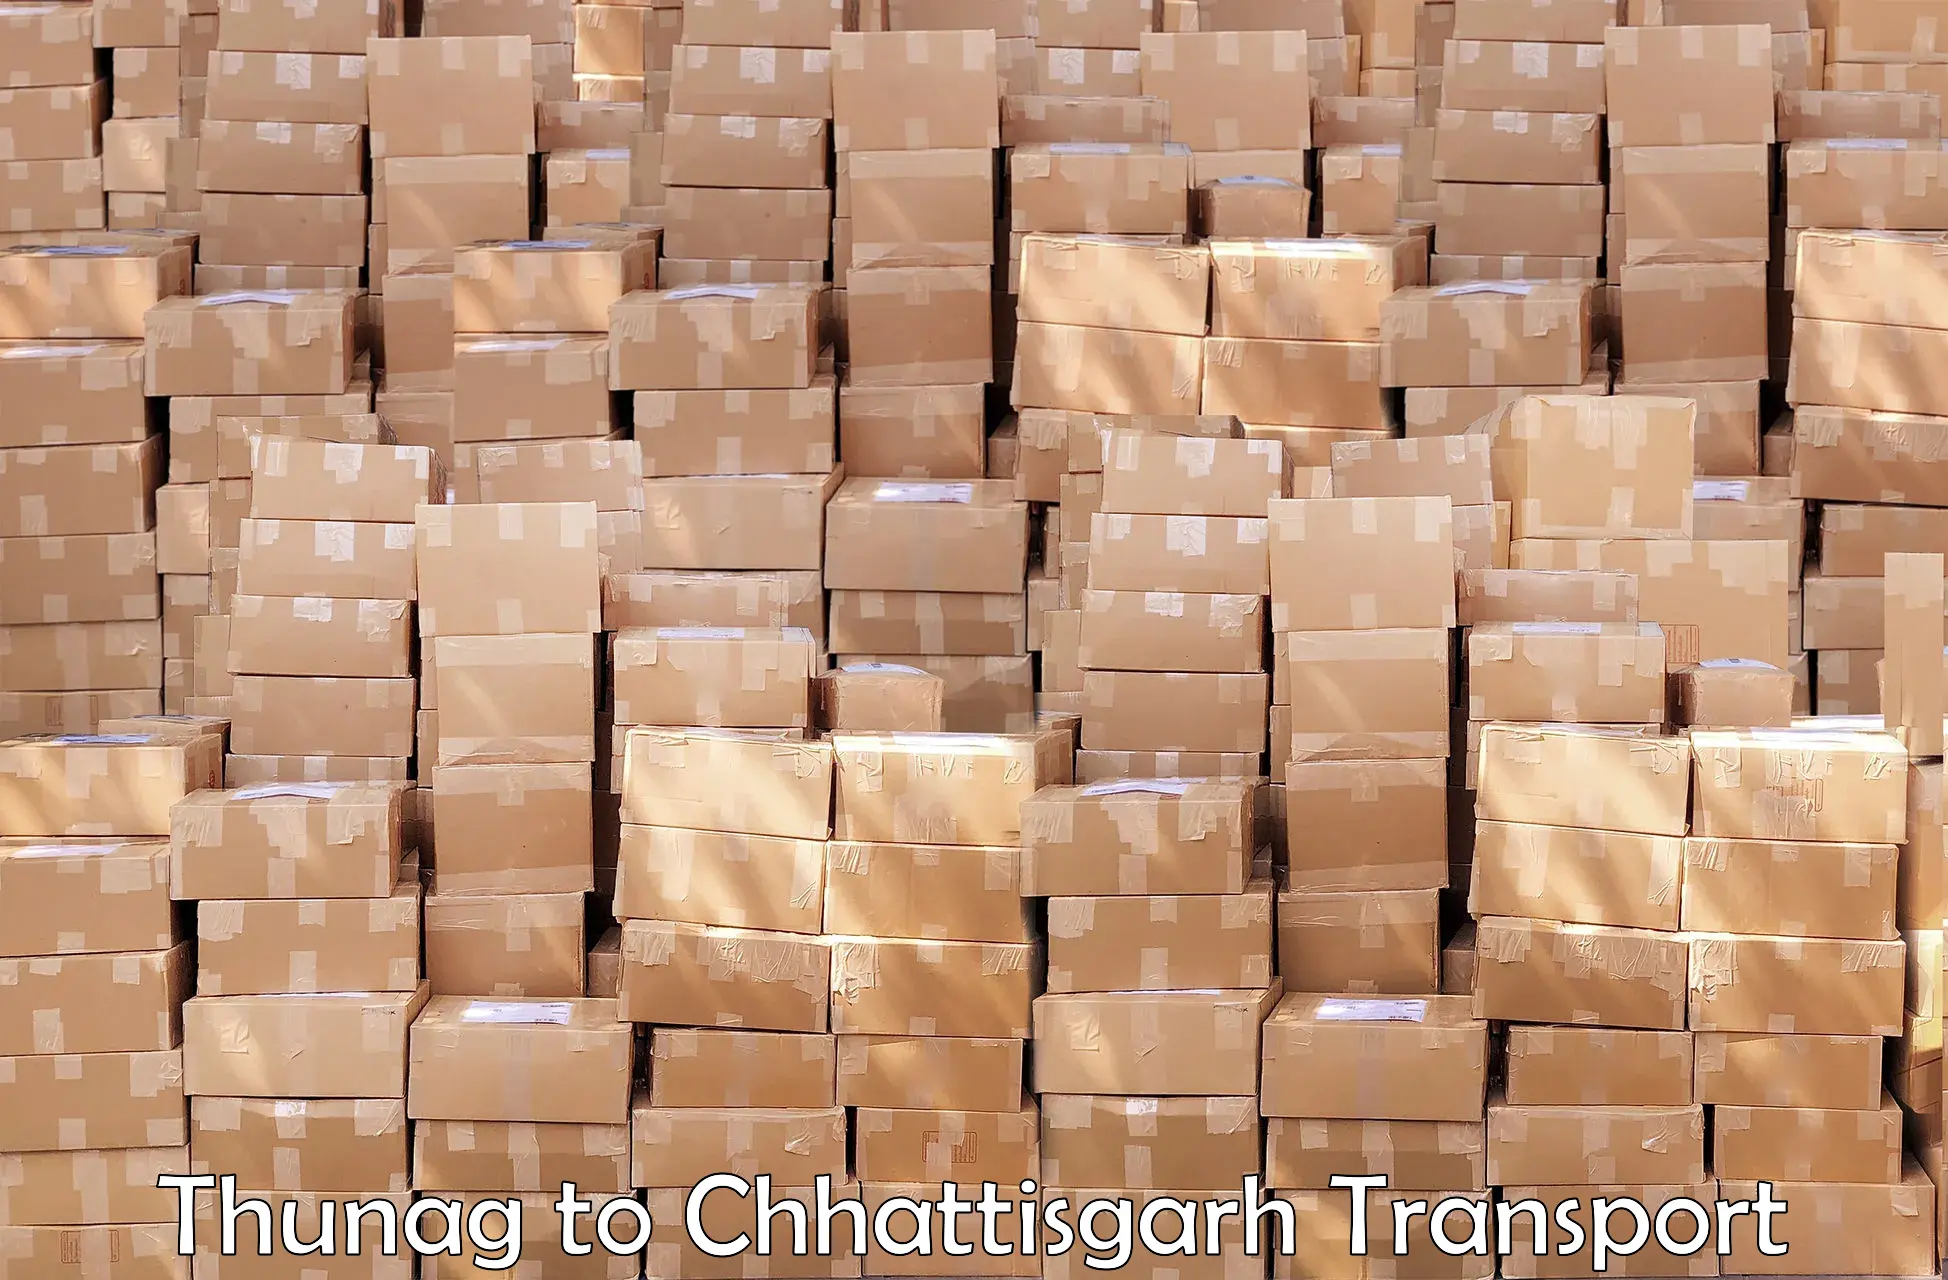 Truck transport companies in India in Thunag to Raigarh